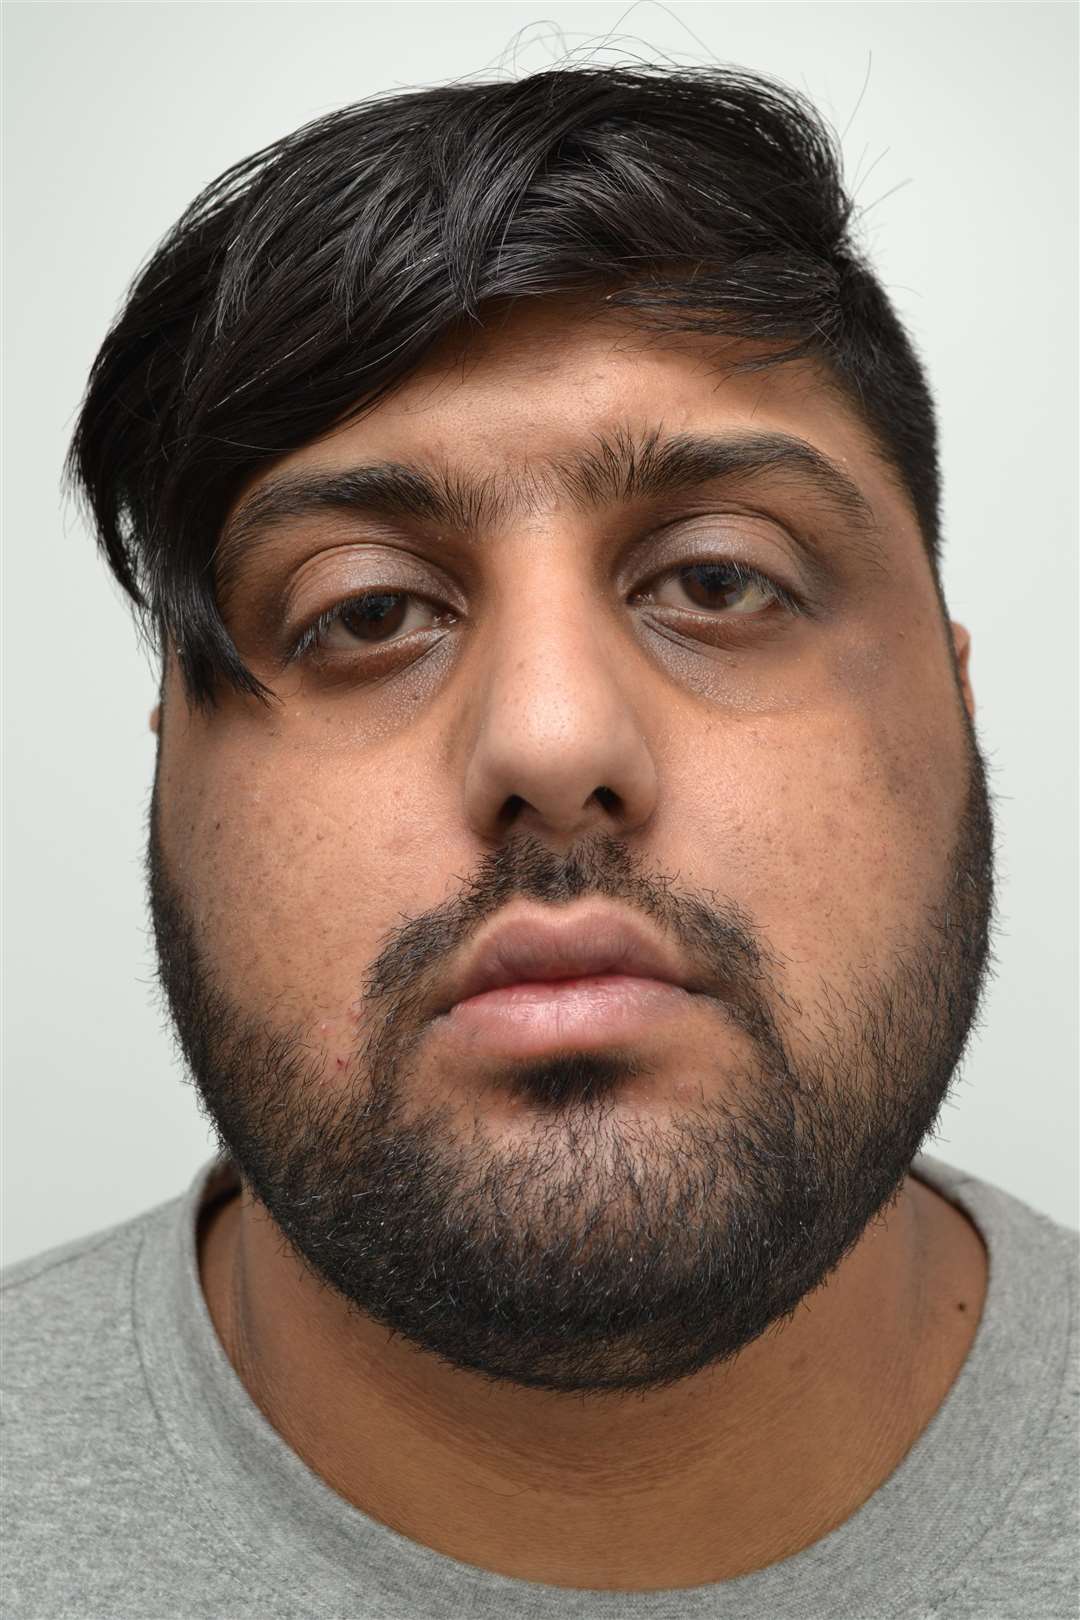 NHS clinical support worker Mohammed Farooq is accused of planning a bomb attack at St James’s Hospital in Leeds (Counter Terrorism Policing North East/PA)